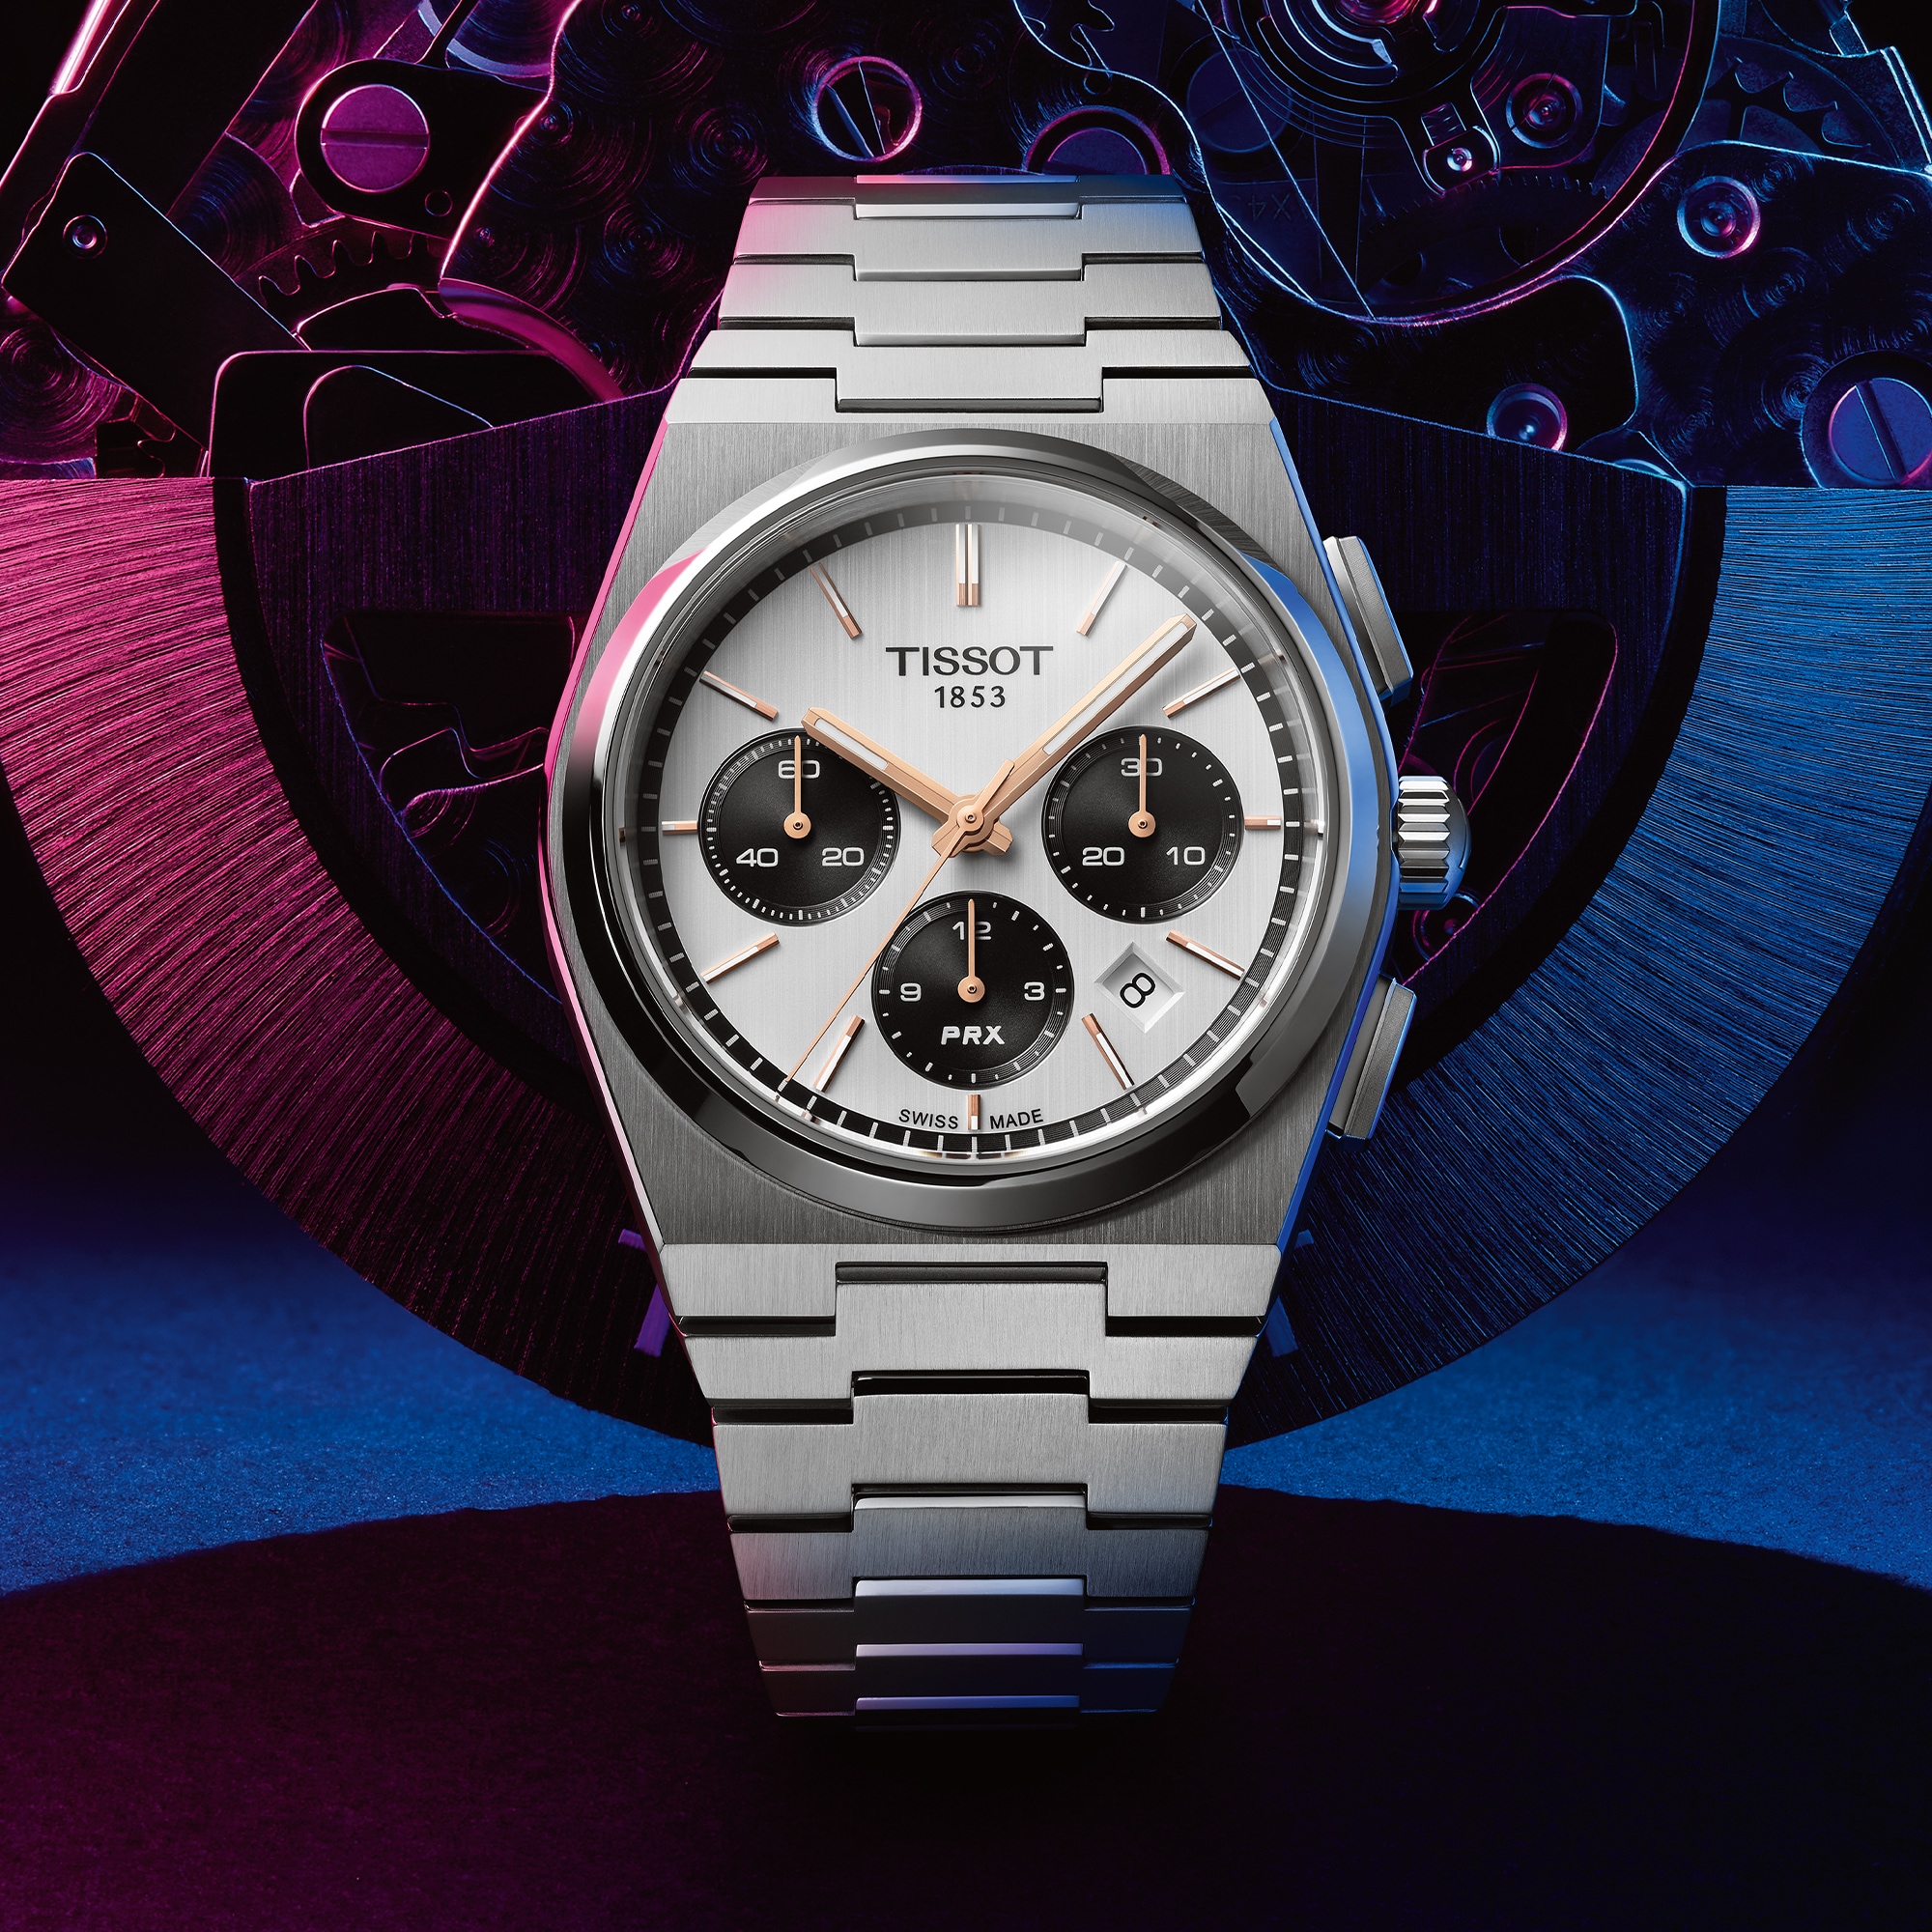 Hands On: Tissot PRX Automatic Chronograph